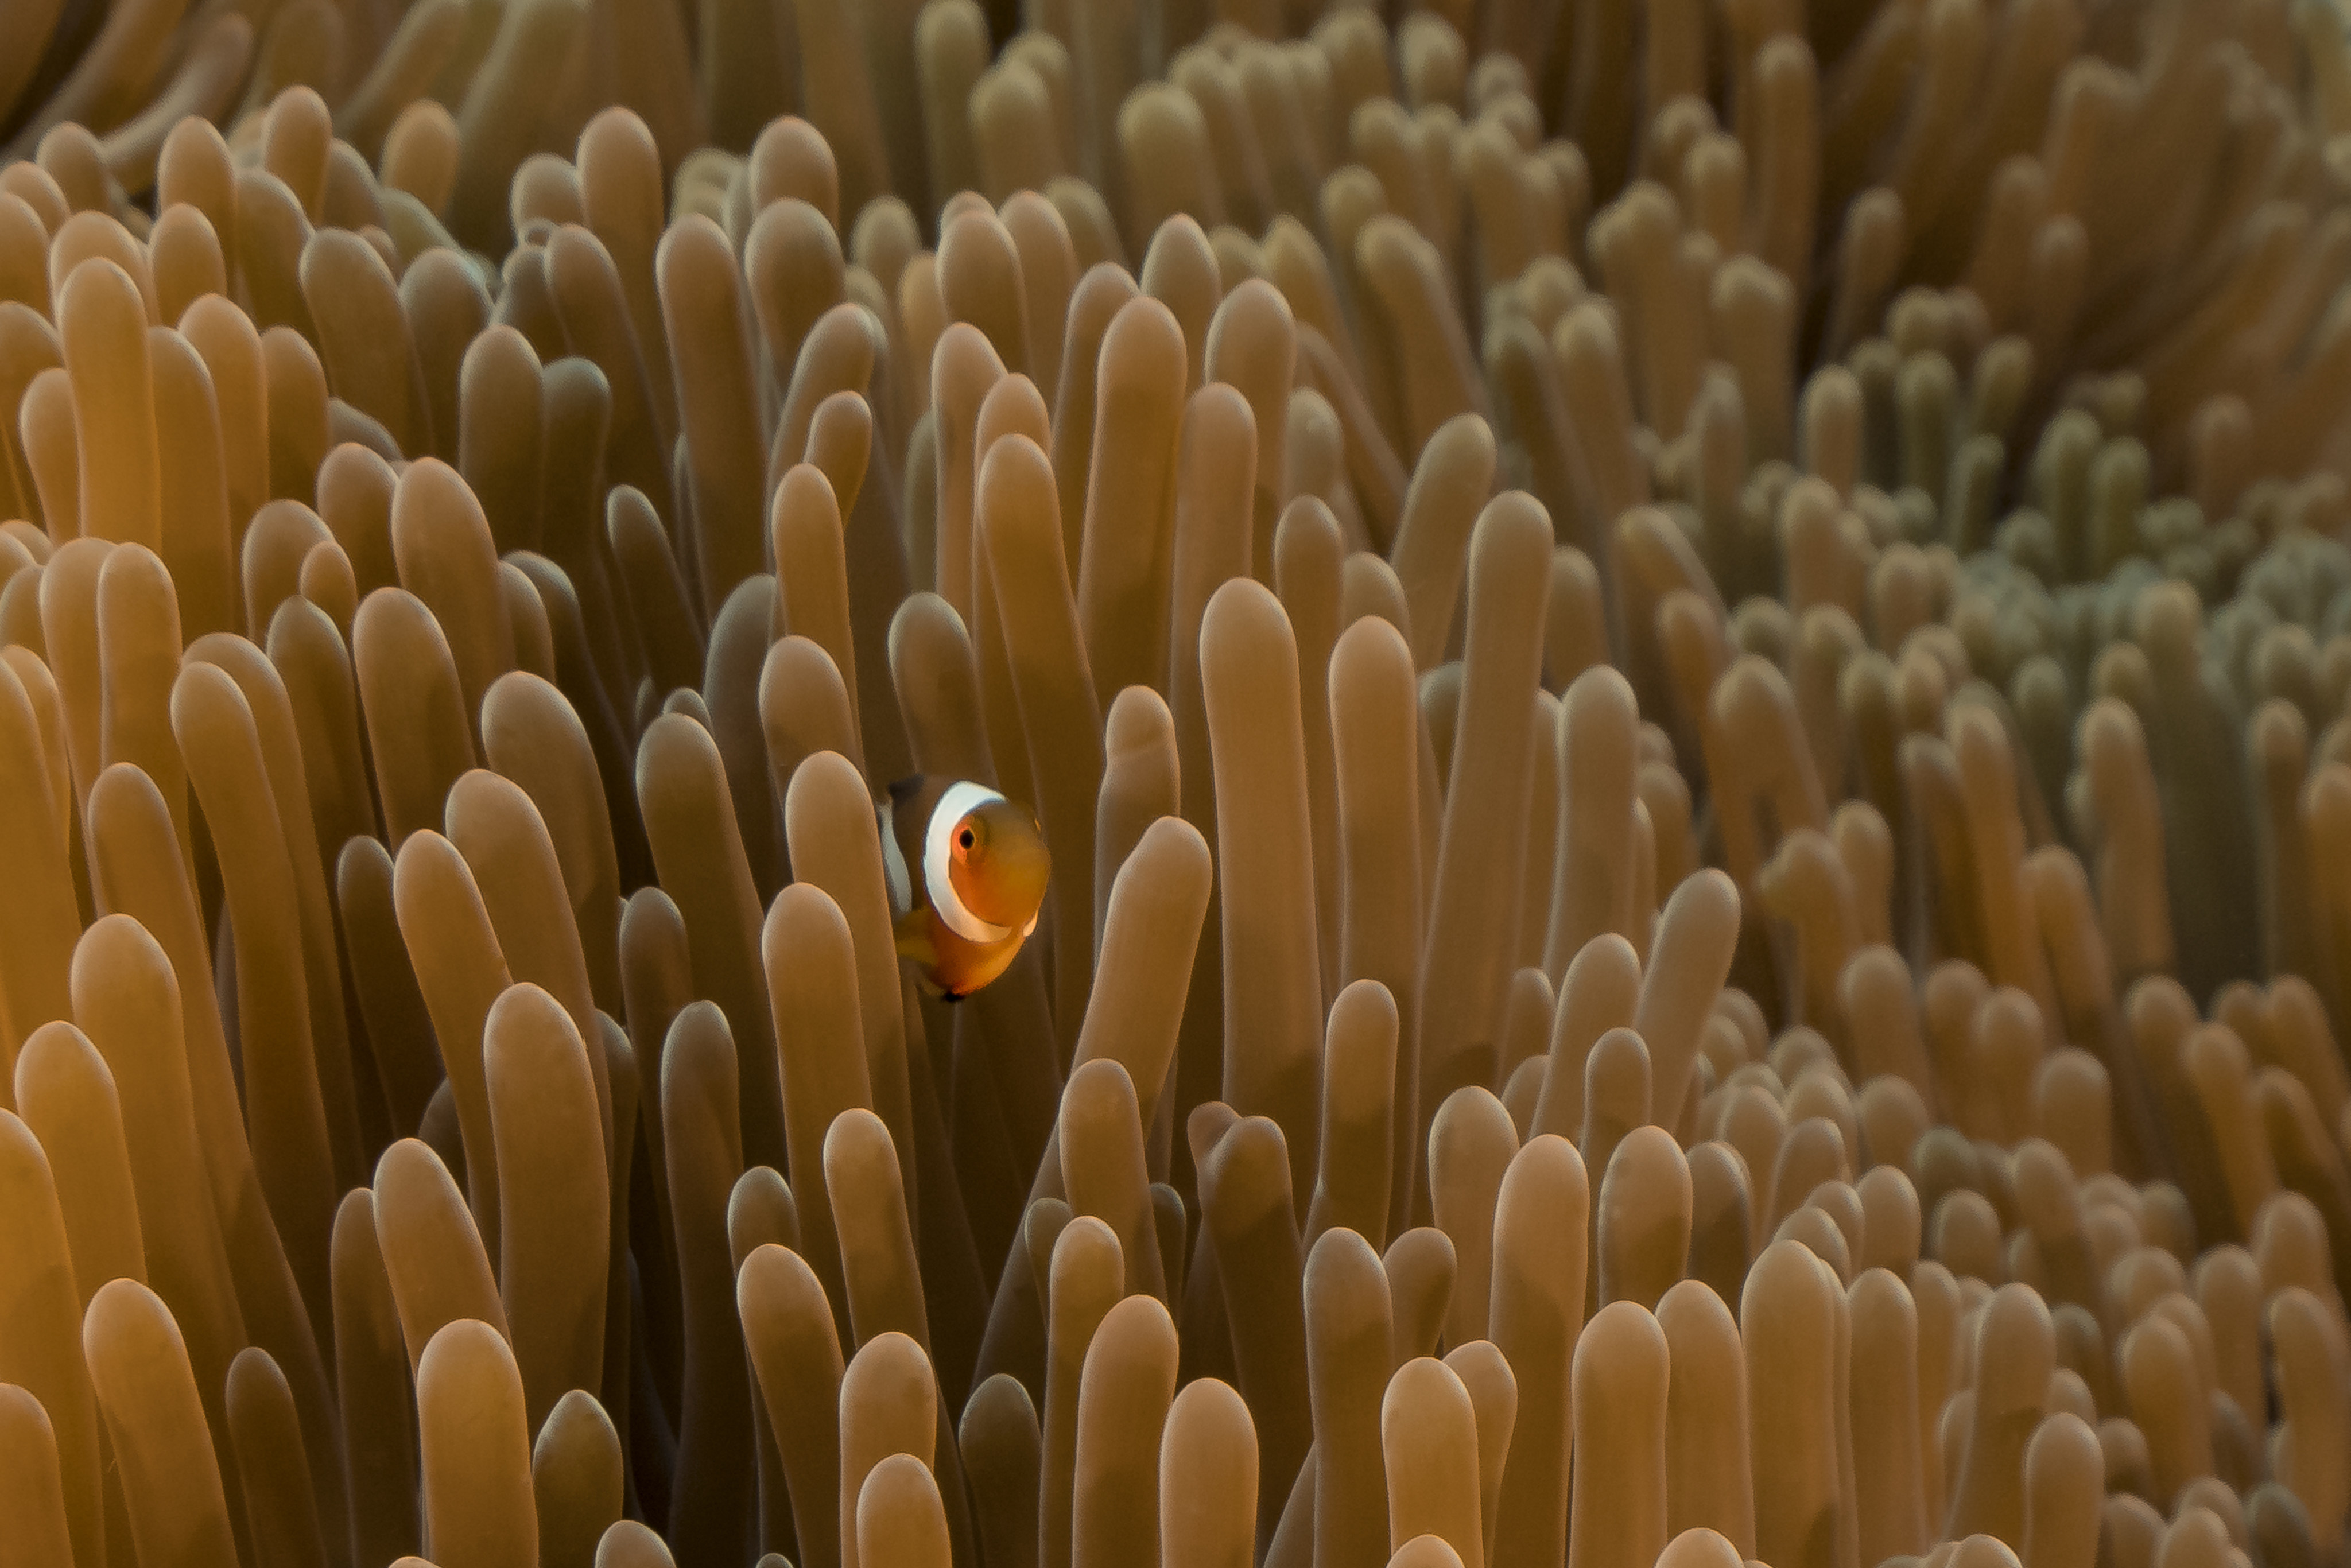 A clown anemonefish hides in the Tubbataha Reef in the Sulu Sea, off the coast of the Philippines. Photo: Getty Images